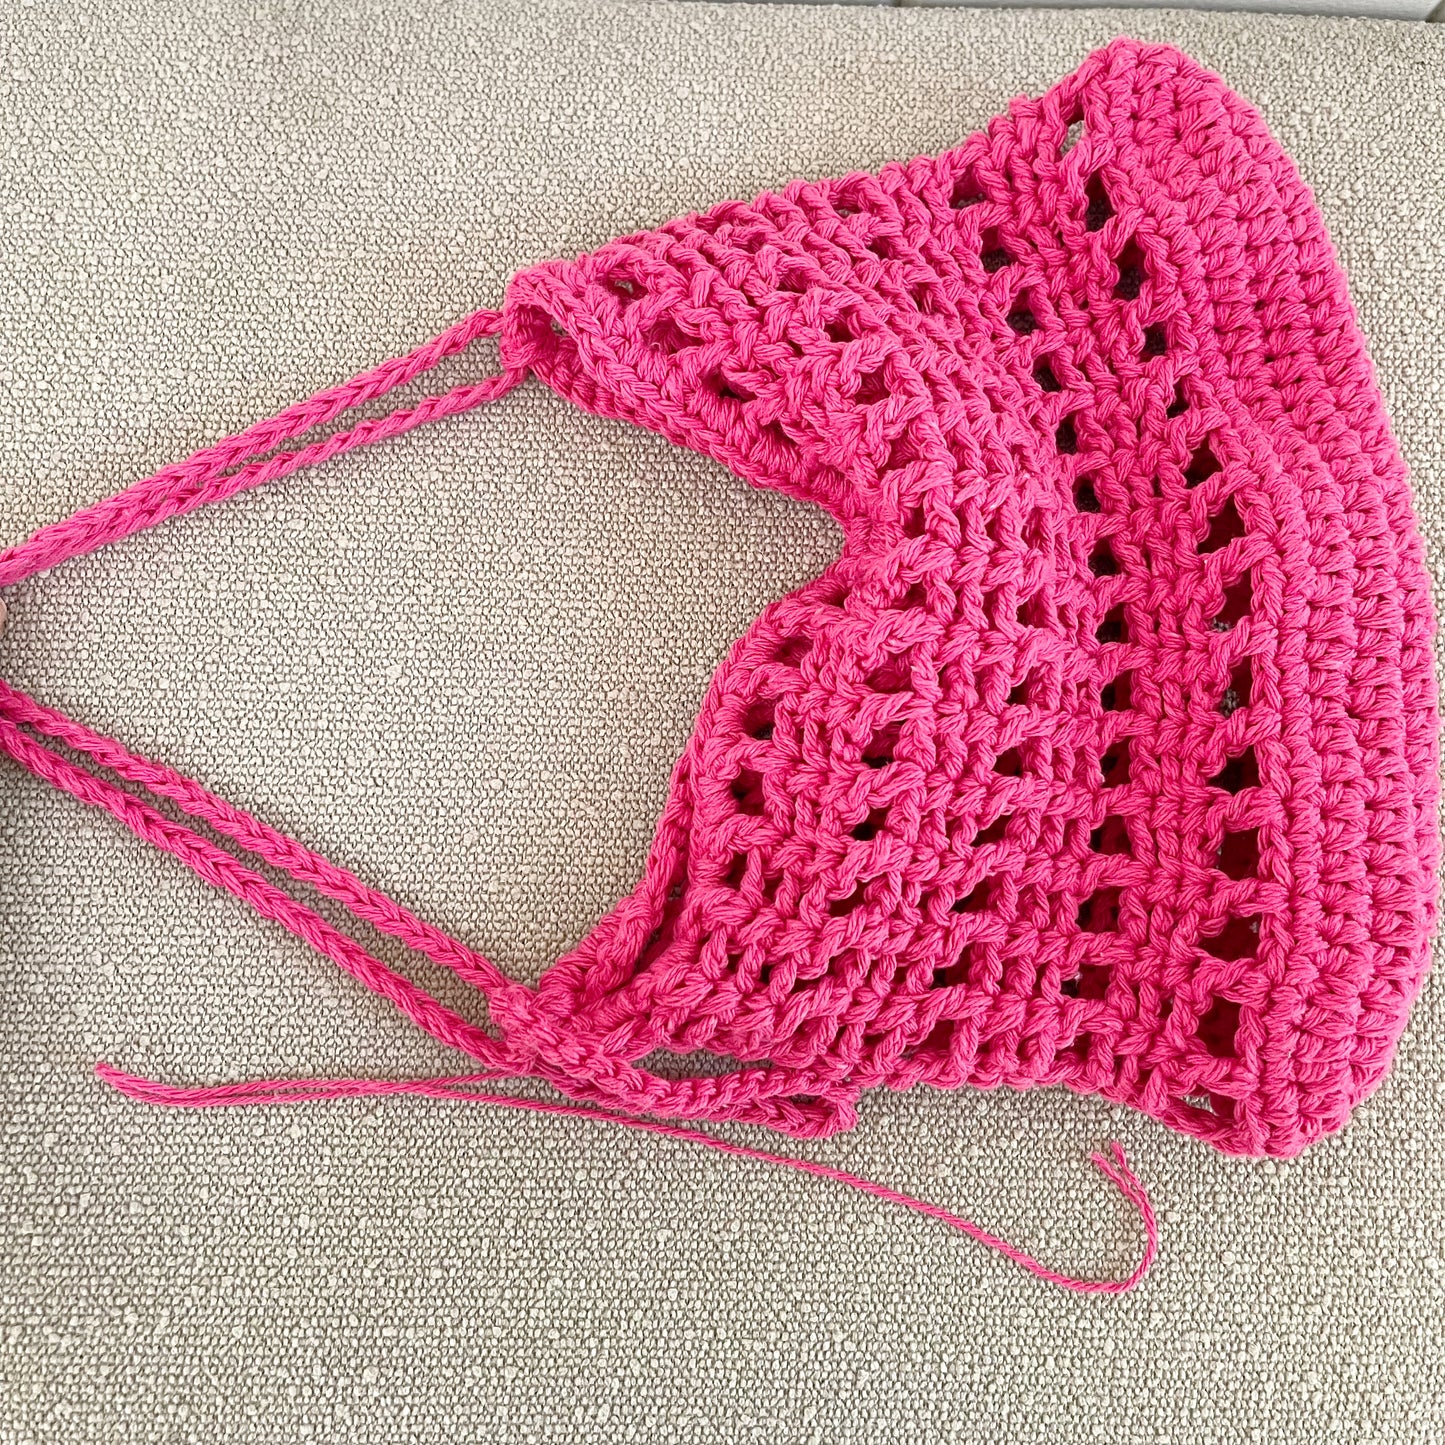 A closeup picture of a crochet mesh handbag in hot pink.  Measures 11" wide x 8" tall + a shoulder strap. Made of 100% cotton.   